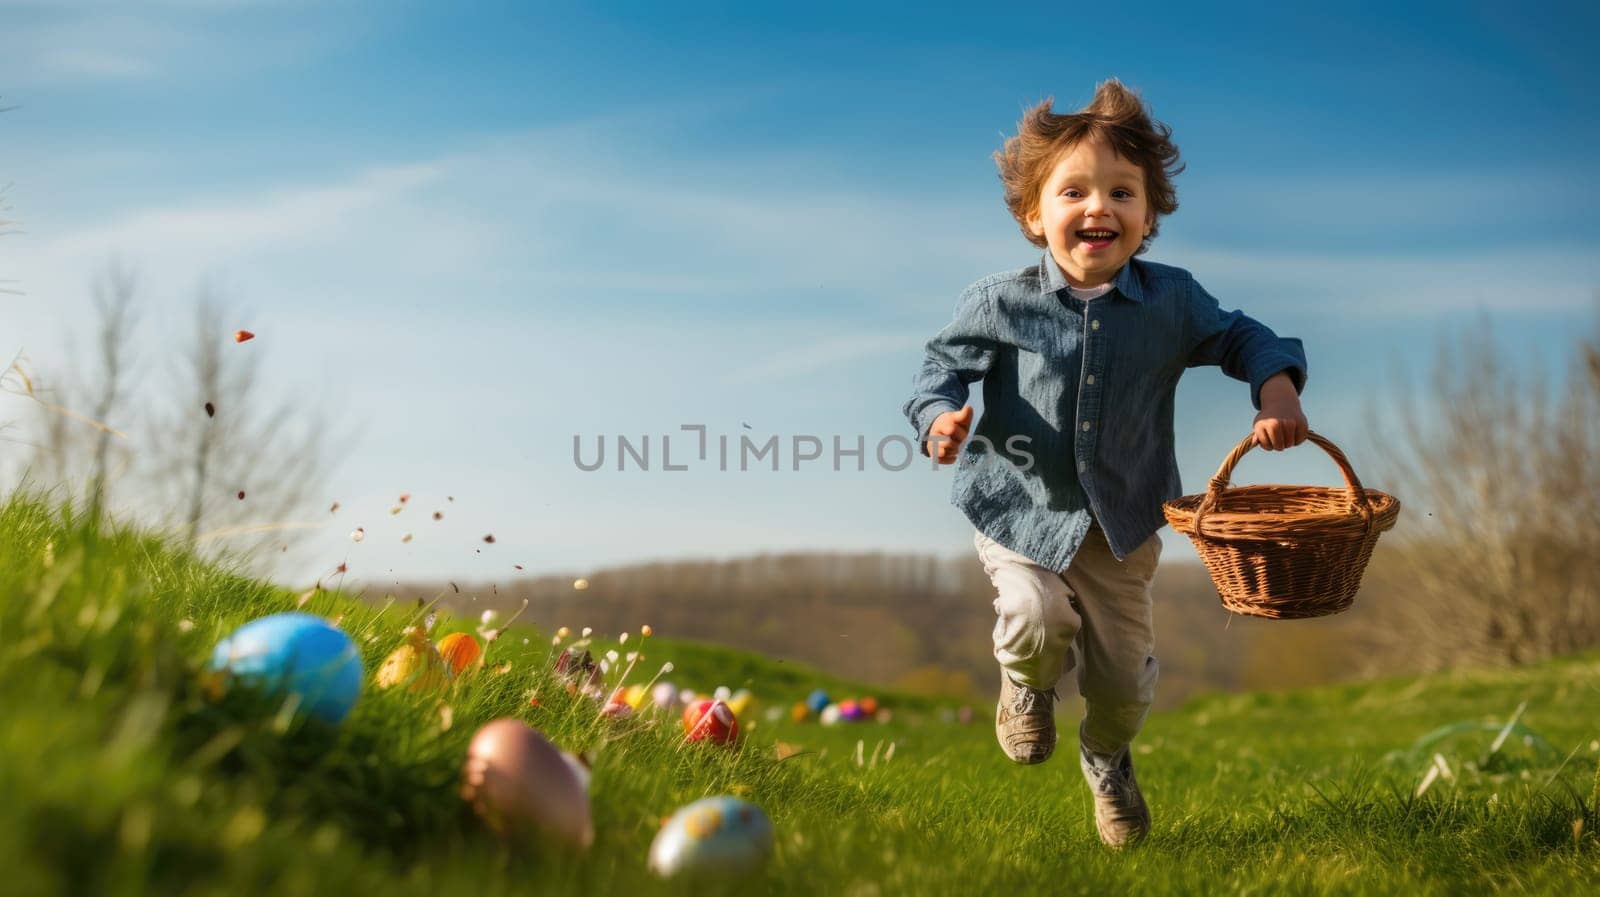 Boy Running with Easter Basket on Green Grass Field with Colorful Eggs by JuliaDorian